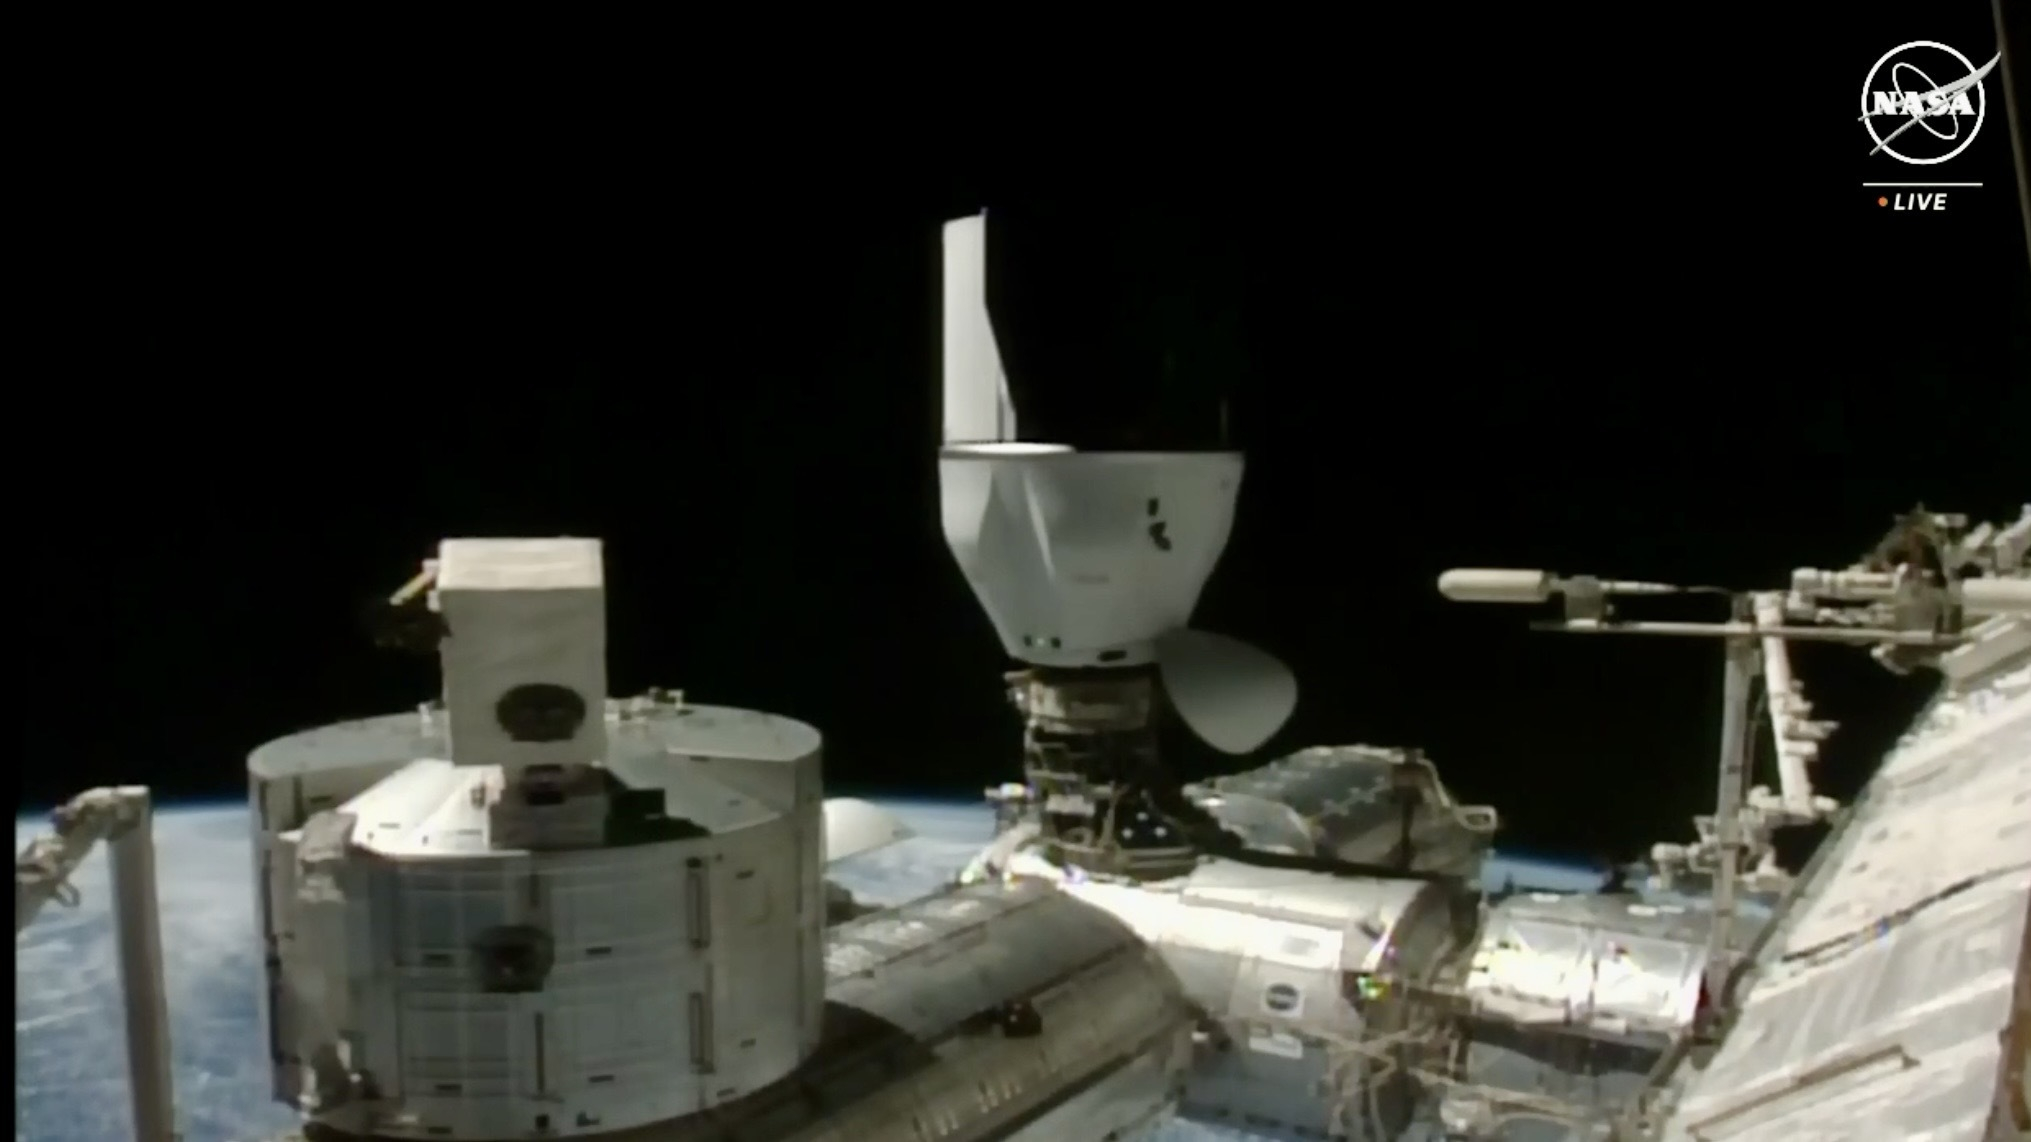 SpaceX’s Dragon capsule docks at ISS on 30th cargo mission for NASA Space